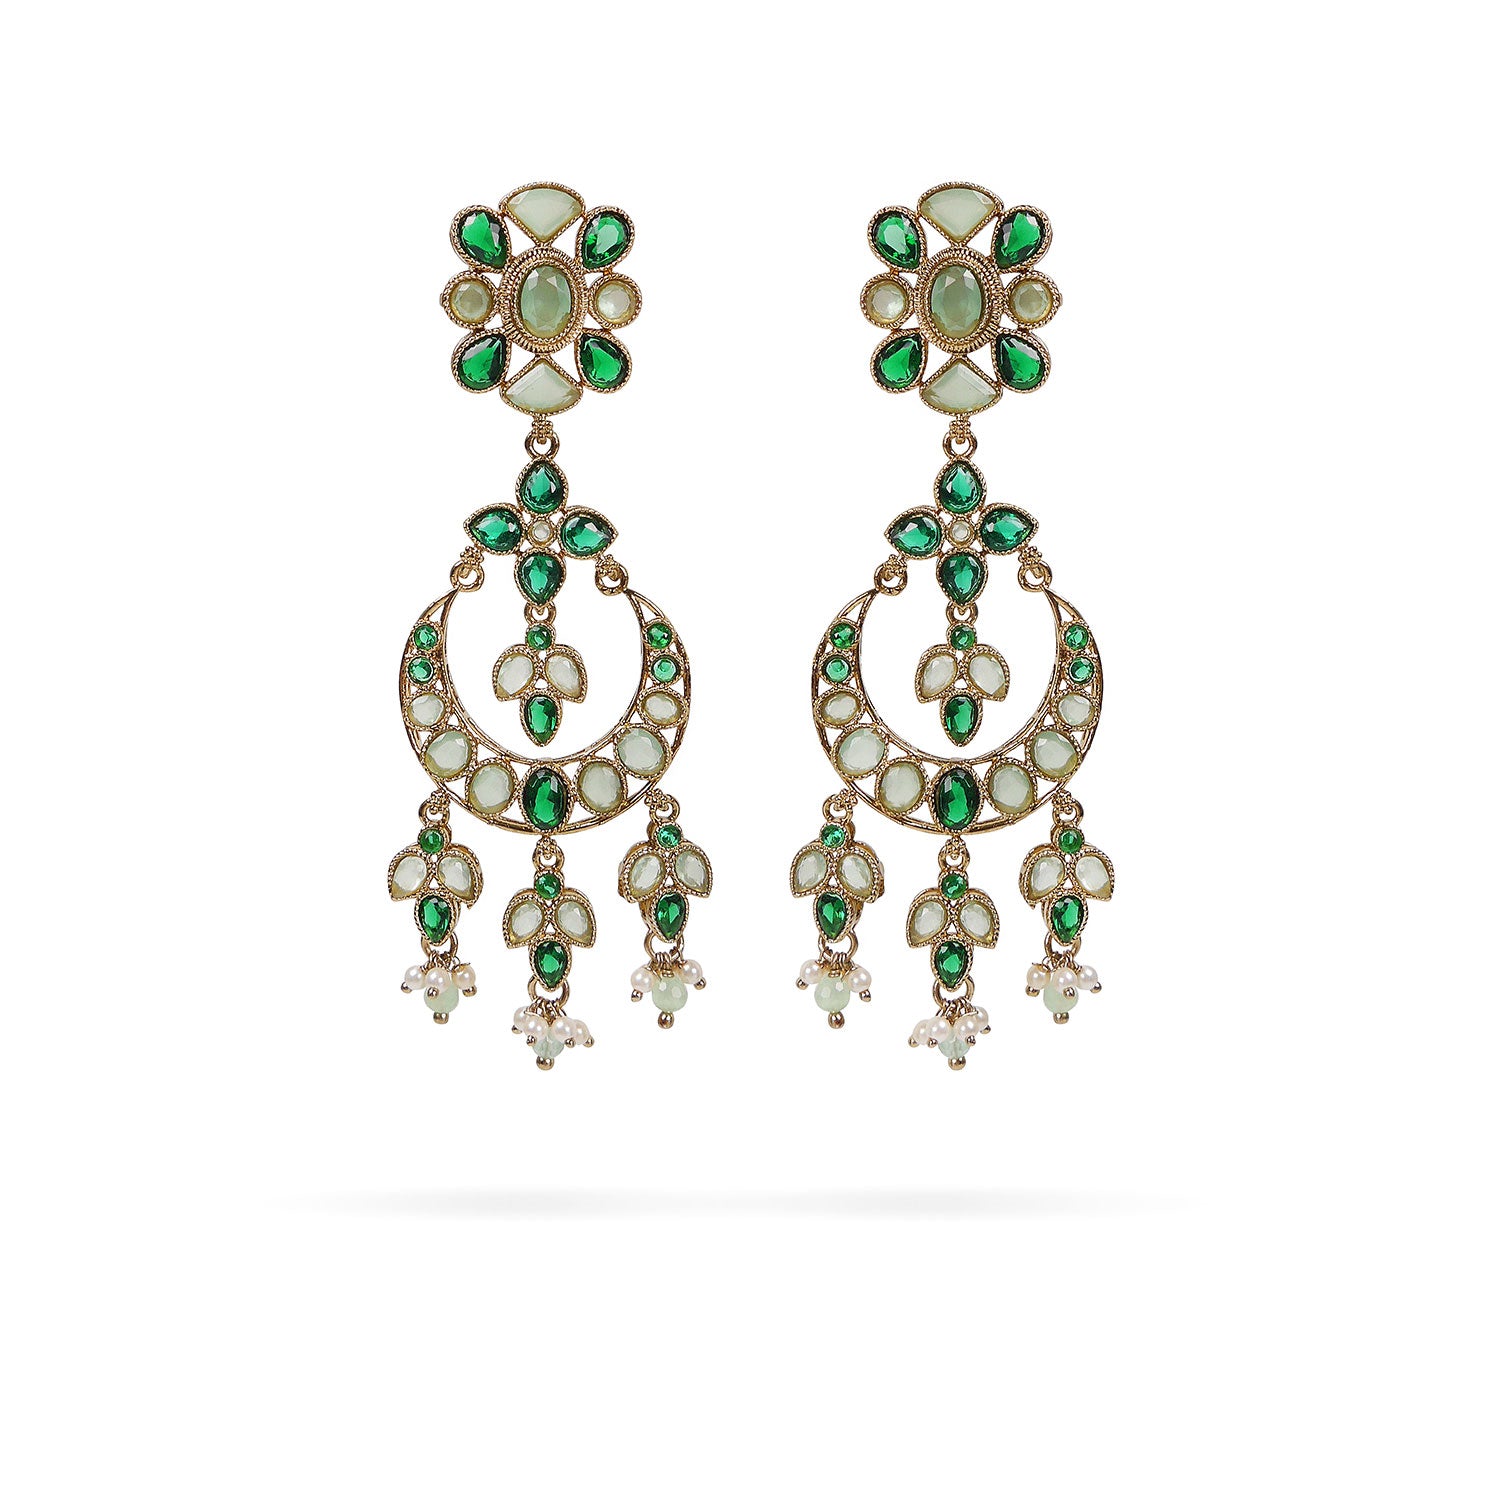 Mariana Long Crystal Earrings in Green and Mint